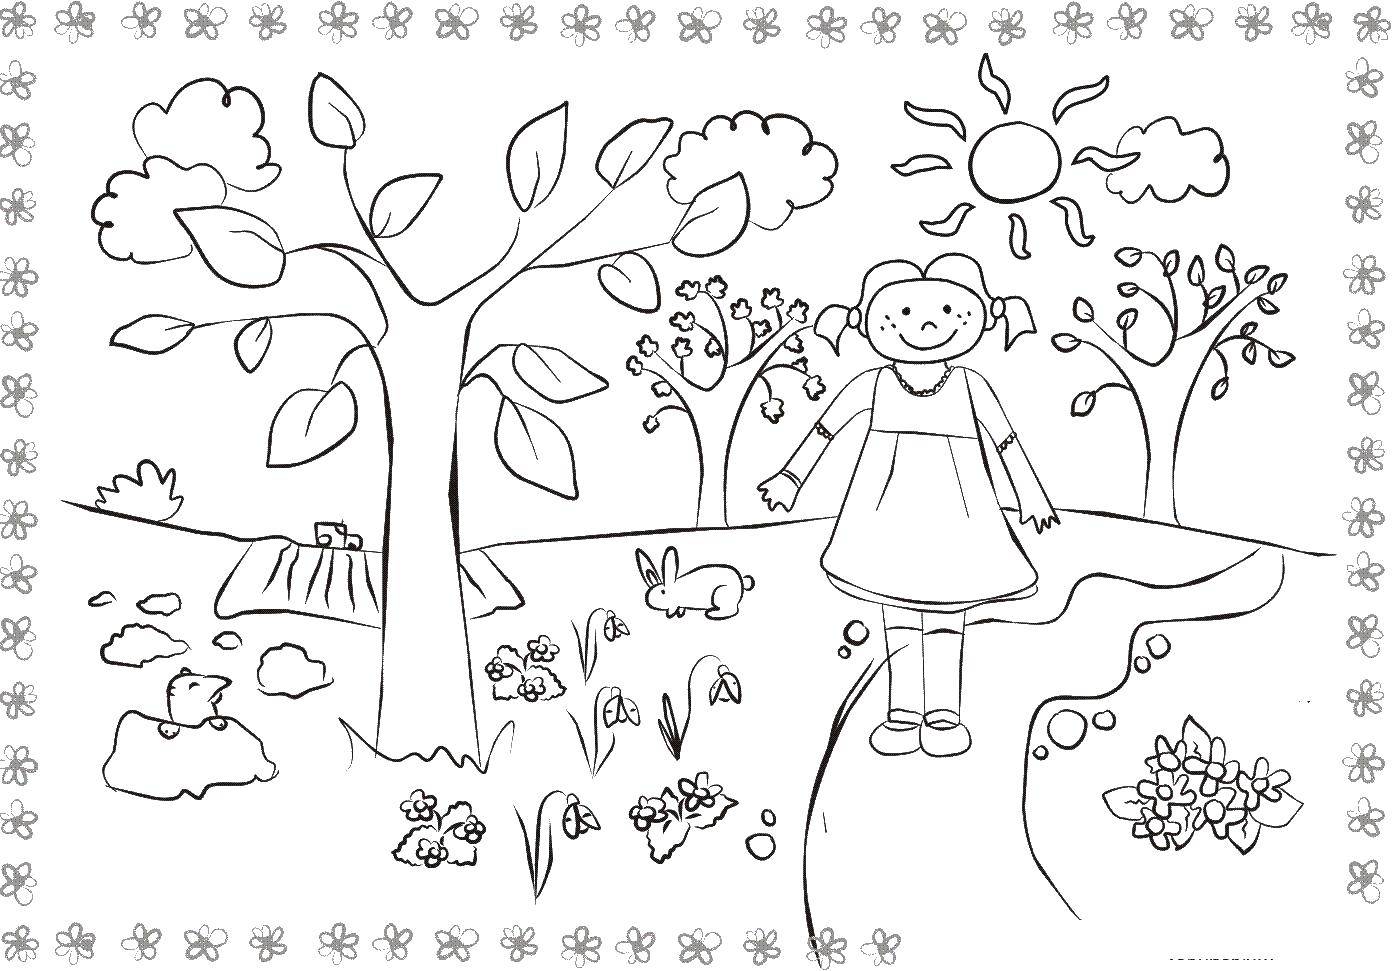 Coloring The girl in the forest. Category Nature. Tags:  nature, forest, girl, plants.